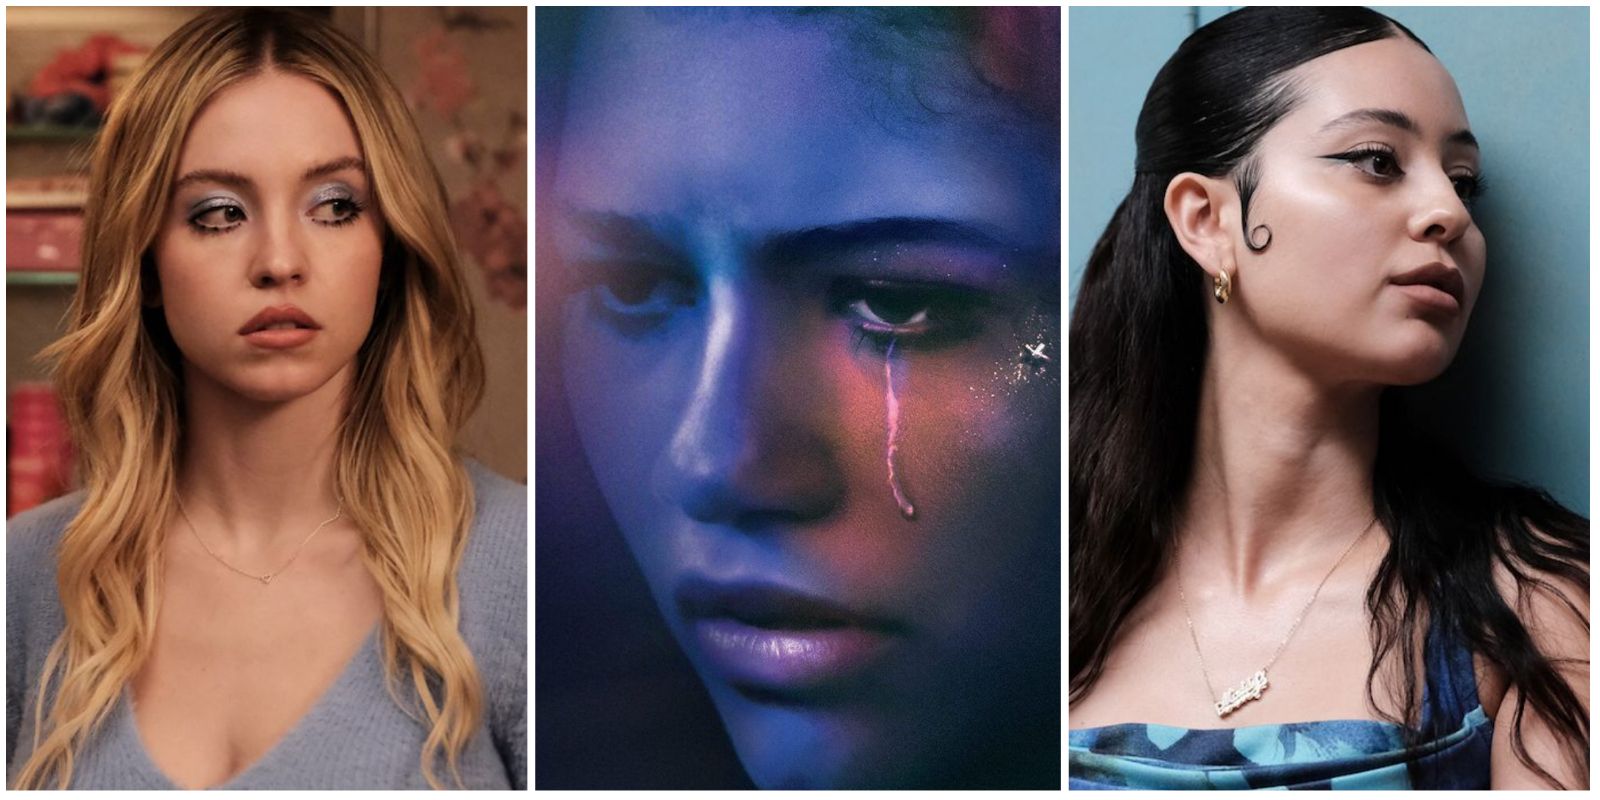 Euphoria: 10 Things You Didn't Know About The Main Characters